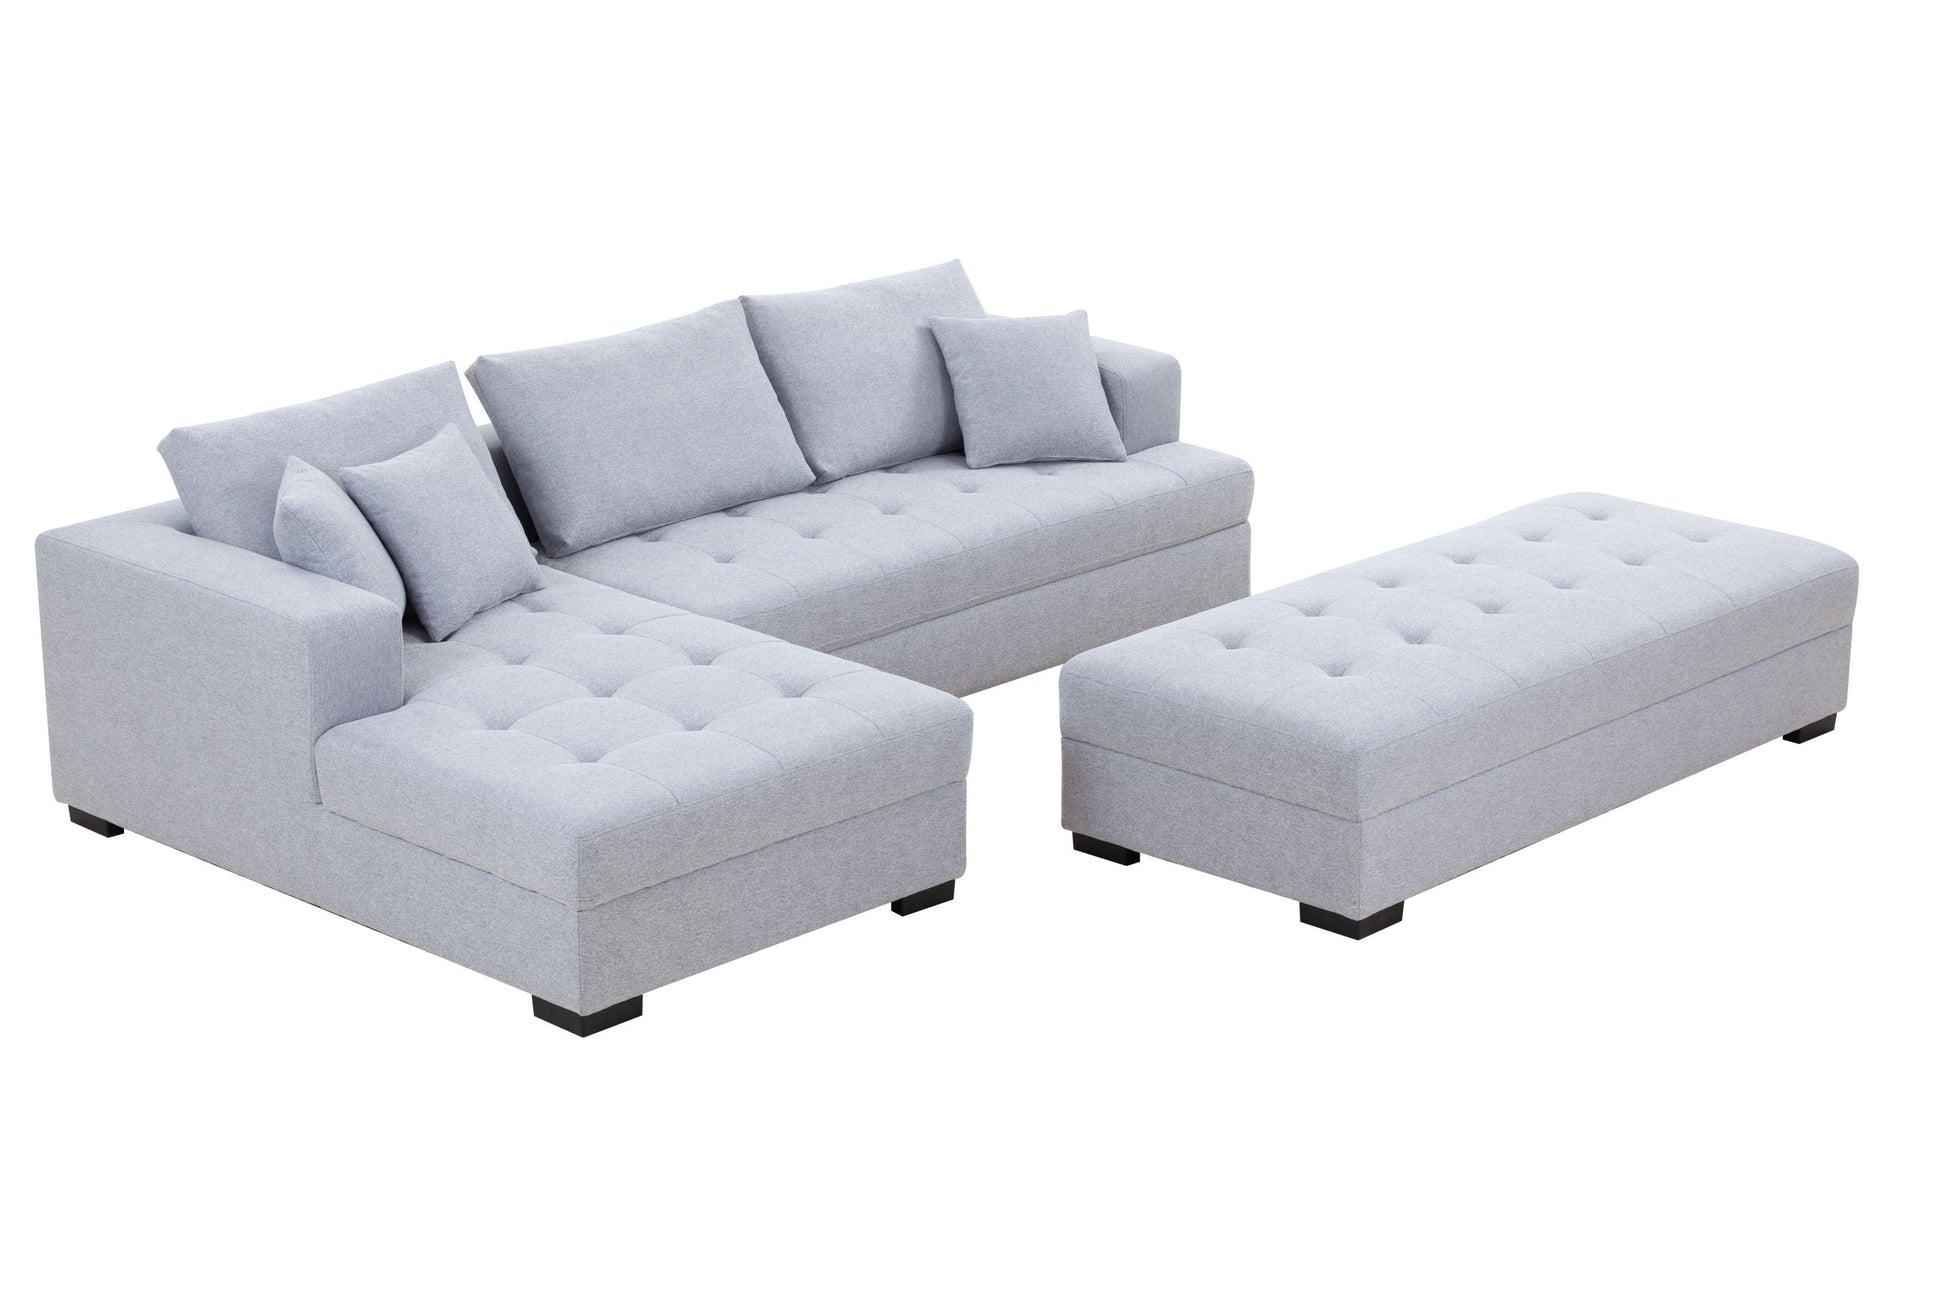 Tufted Fabric 3-Seat L-Shape Sectional Sofa Couch Set w/Chaise Lounge, Ottoman Coffee Table Bench, Light Grey